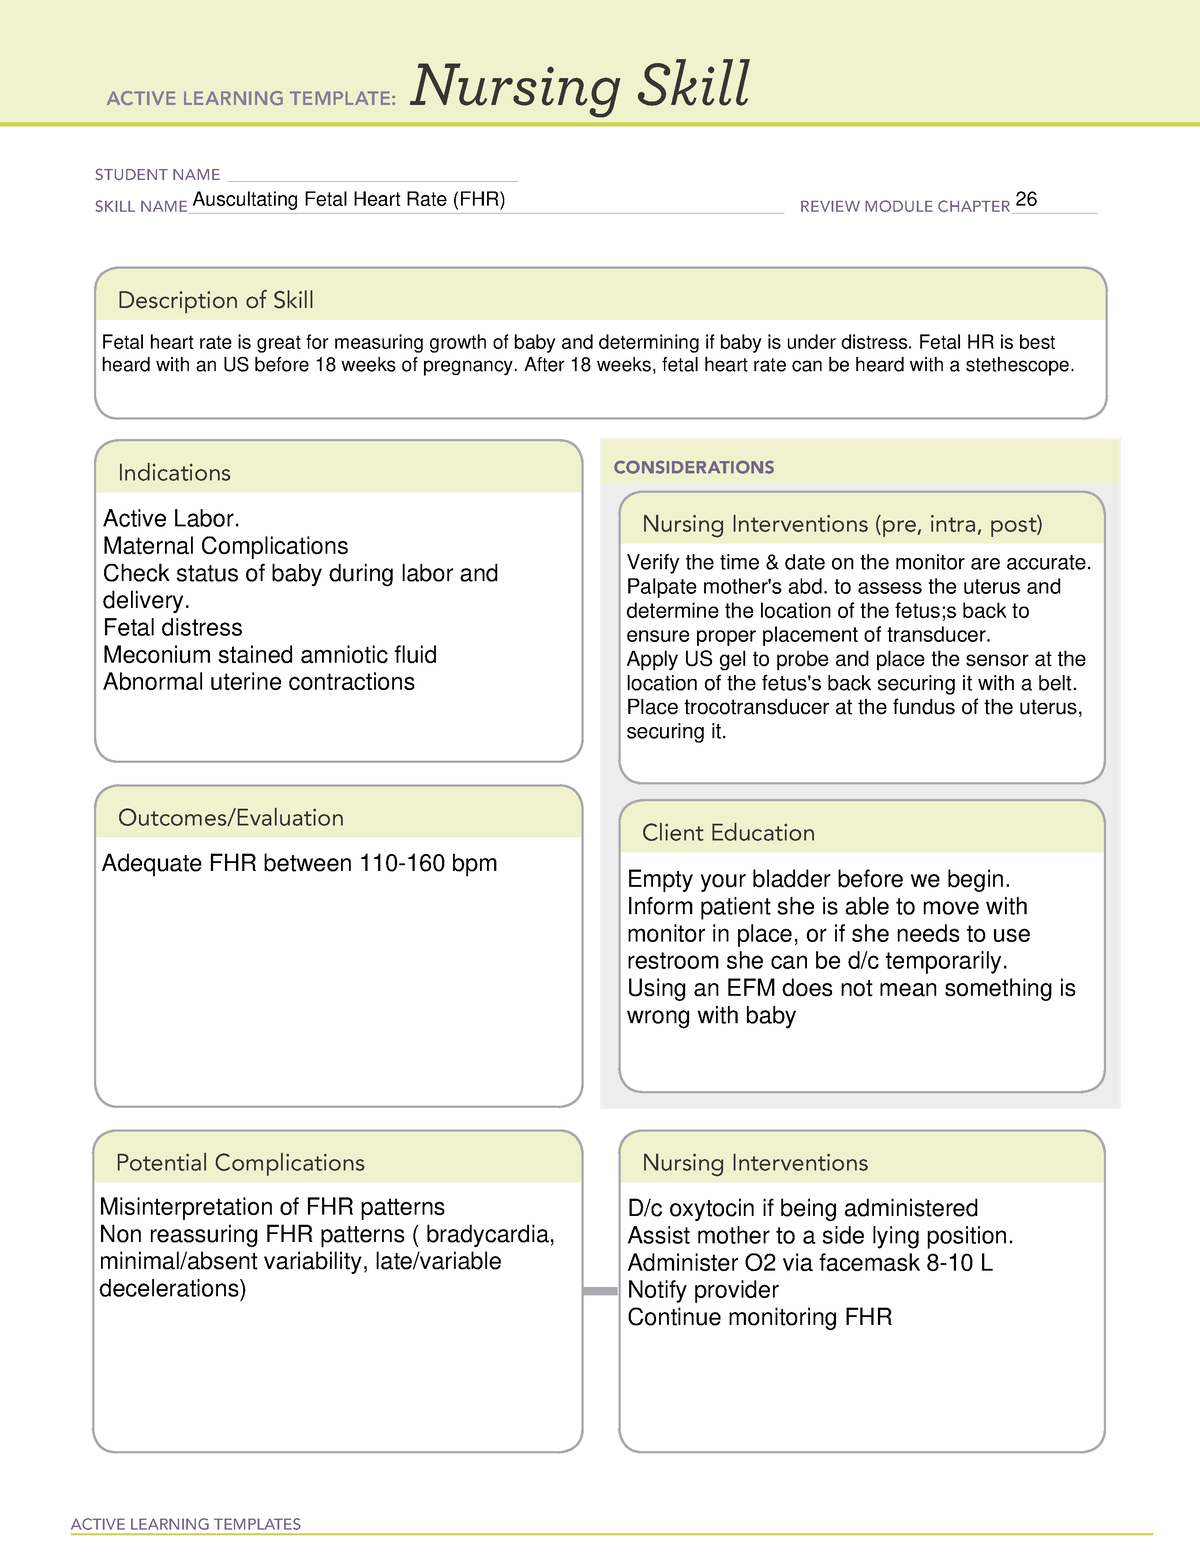 Auscultating FHR Nursing Skill Ch 26 - ACTIVE LEARNING TEMPLATES ...